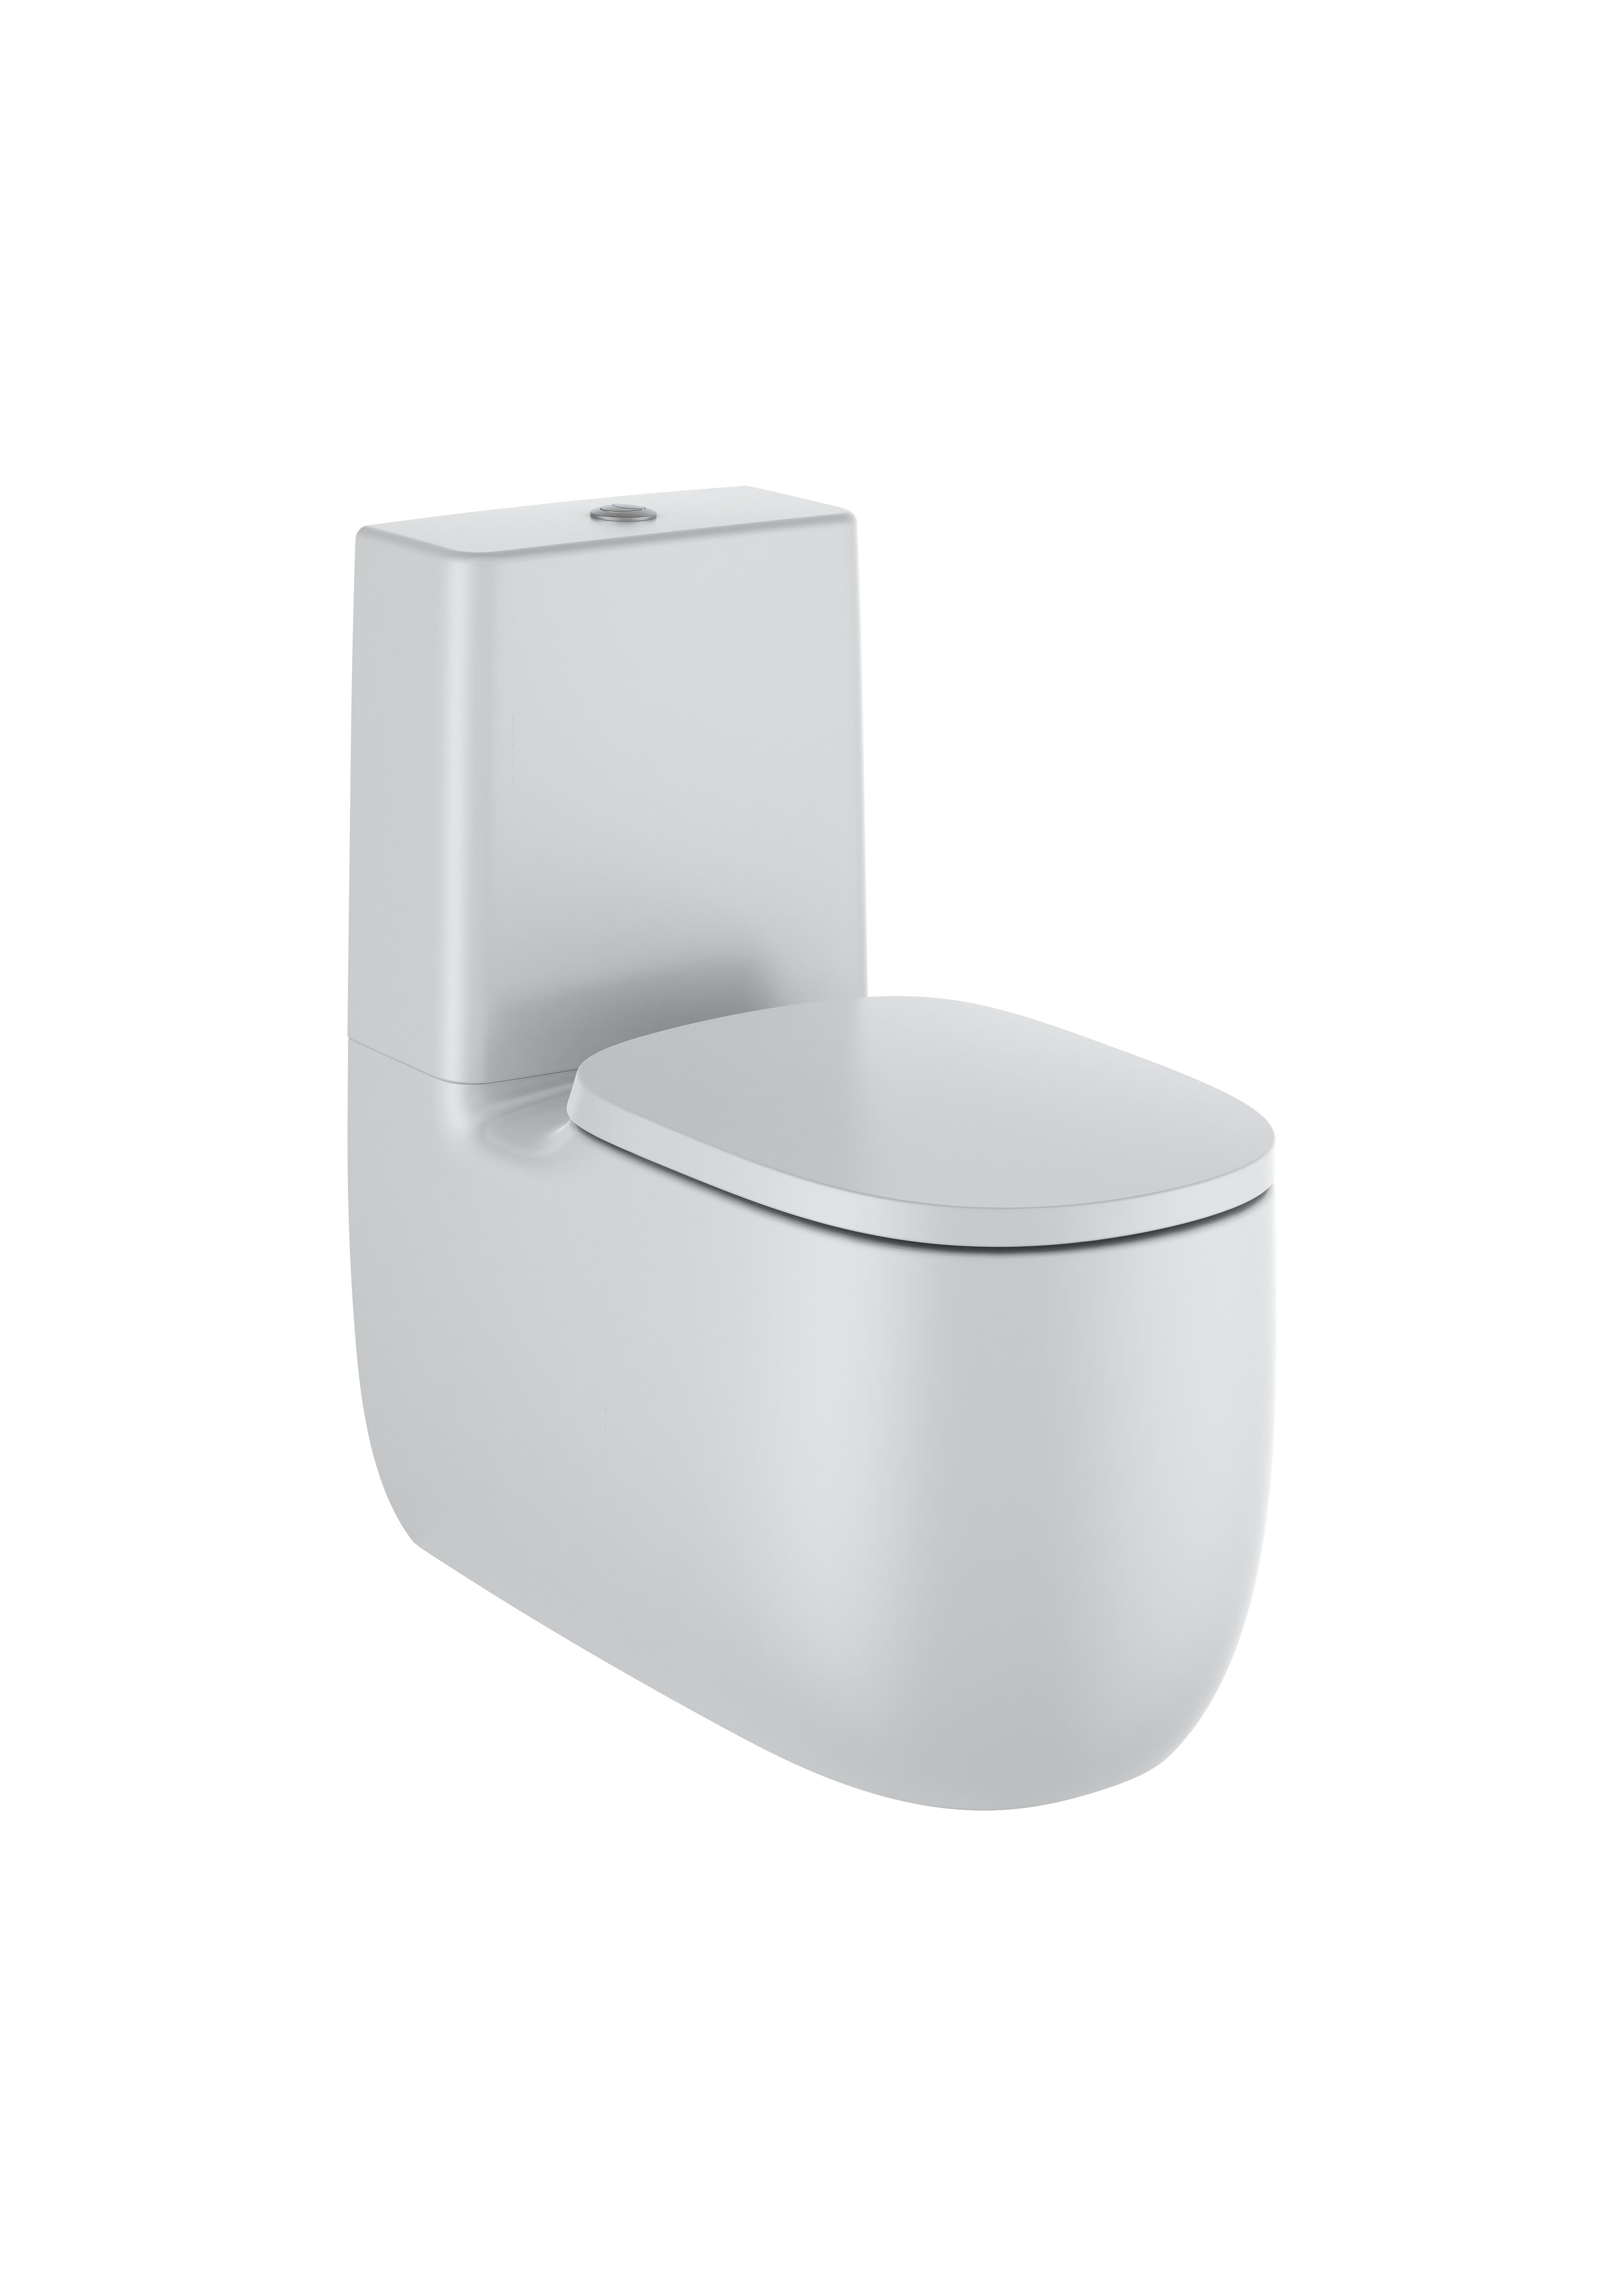 Toilet seats and covers Pearl Beyond A801B8263B Roca